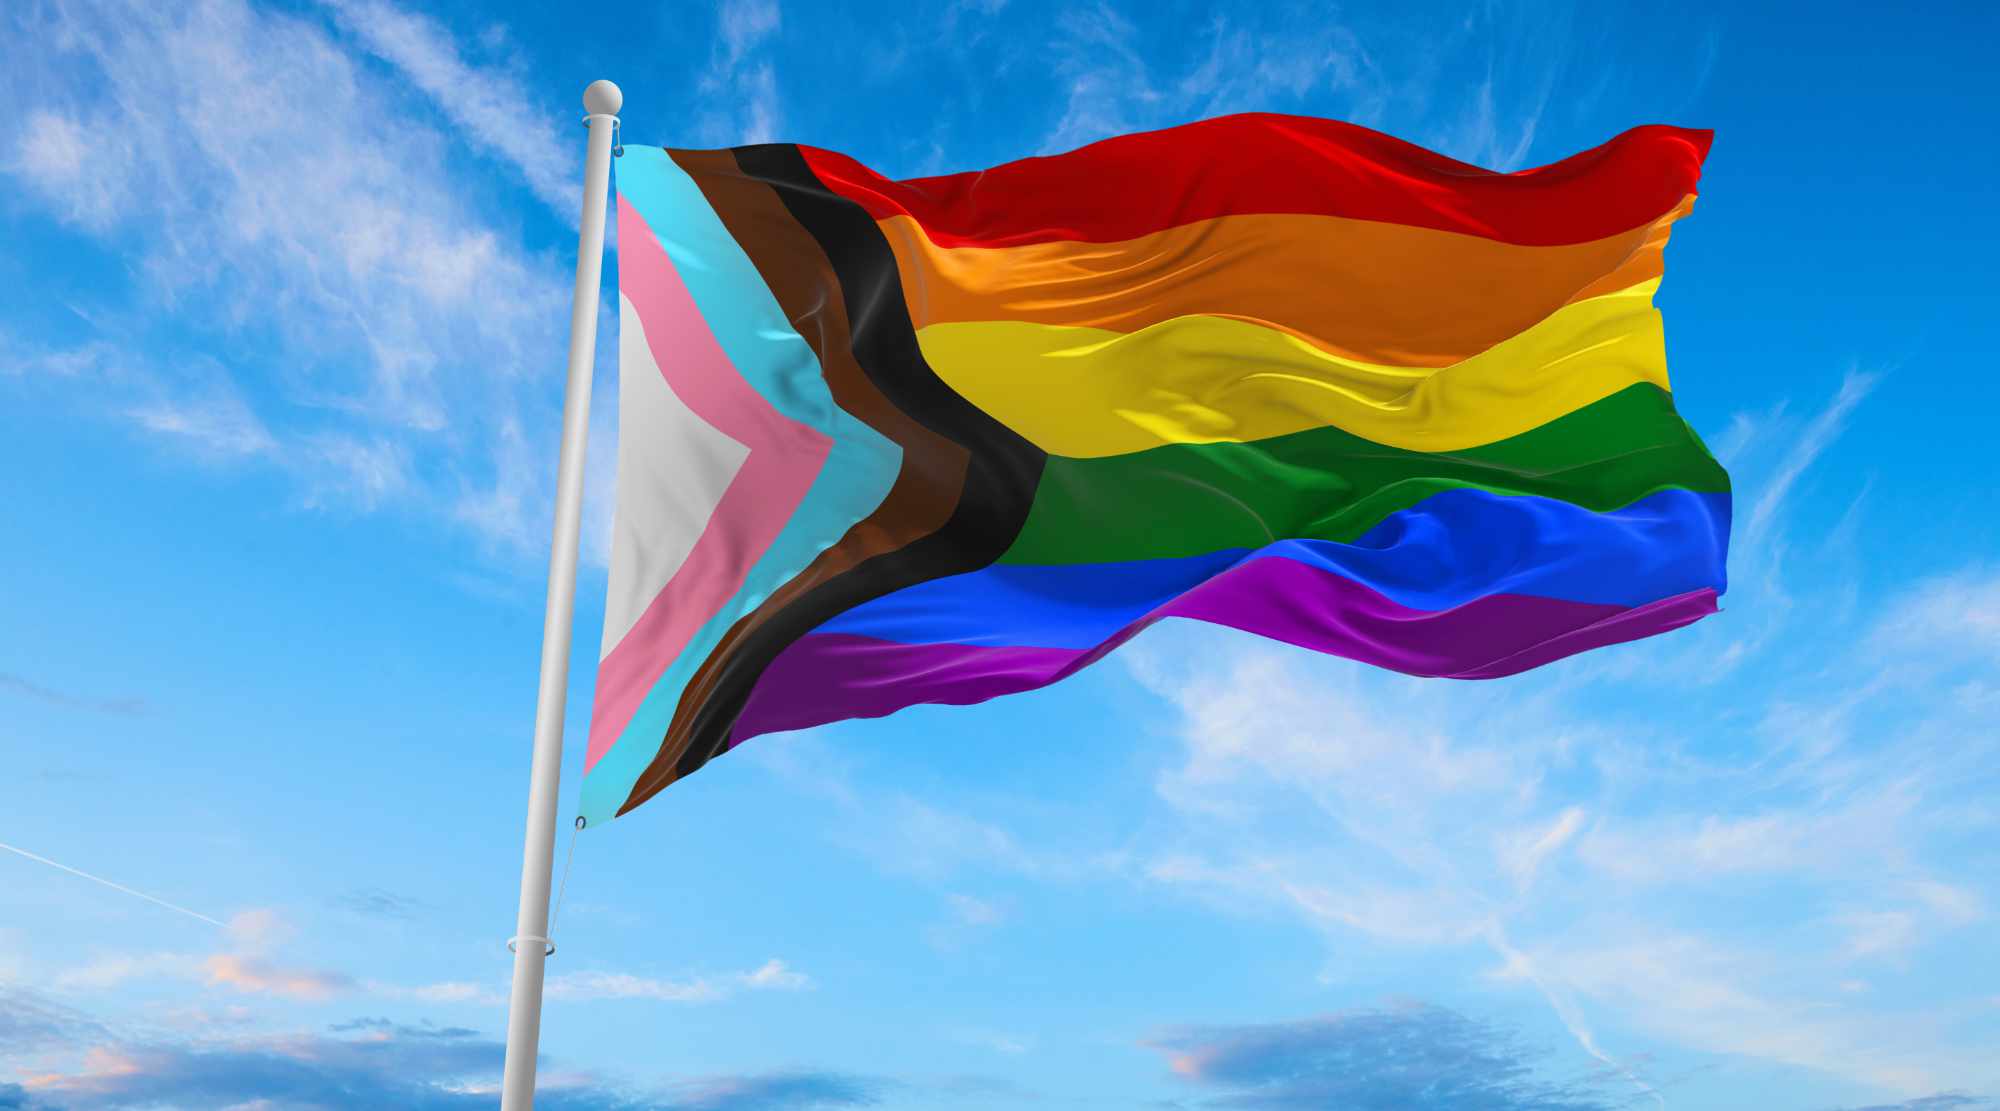 Progress LGBTQ rainbow flag waving in the wind at cloudy sky. Freedom and love concept. Pride month. activism, community and freedom Concept. Copy space. 3d illustration.